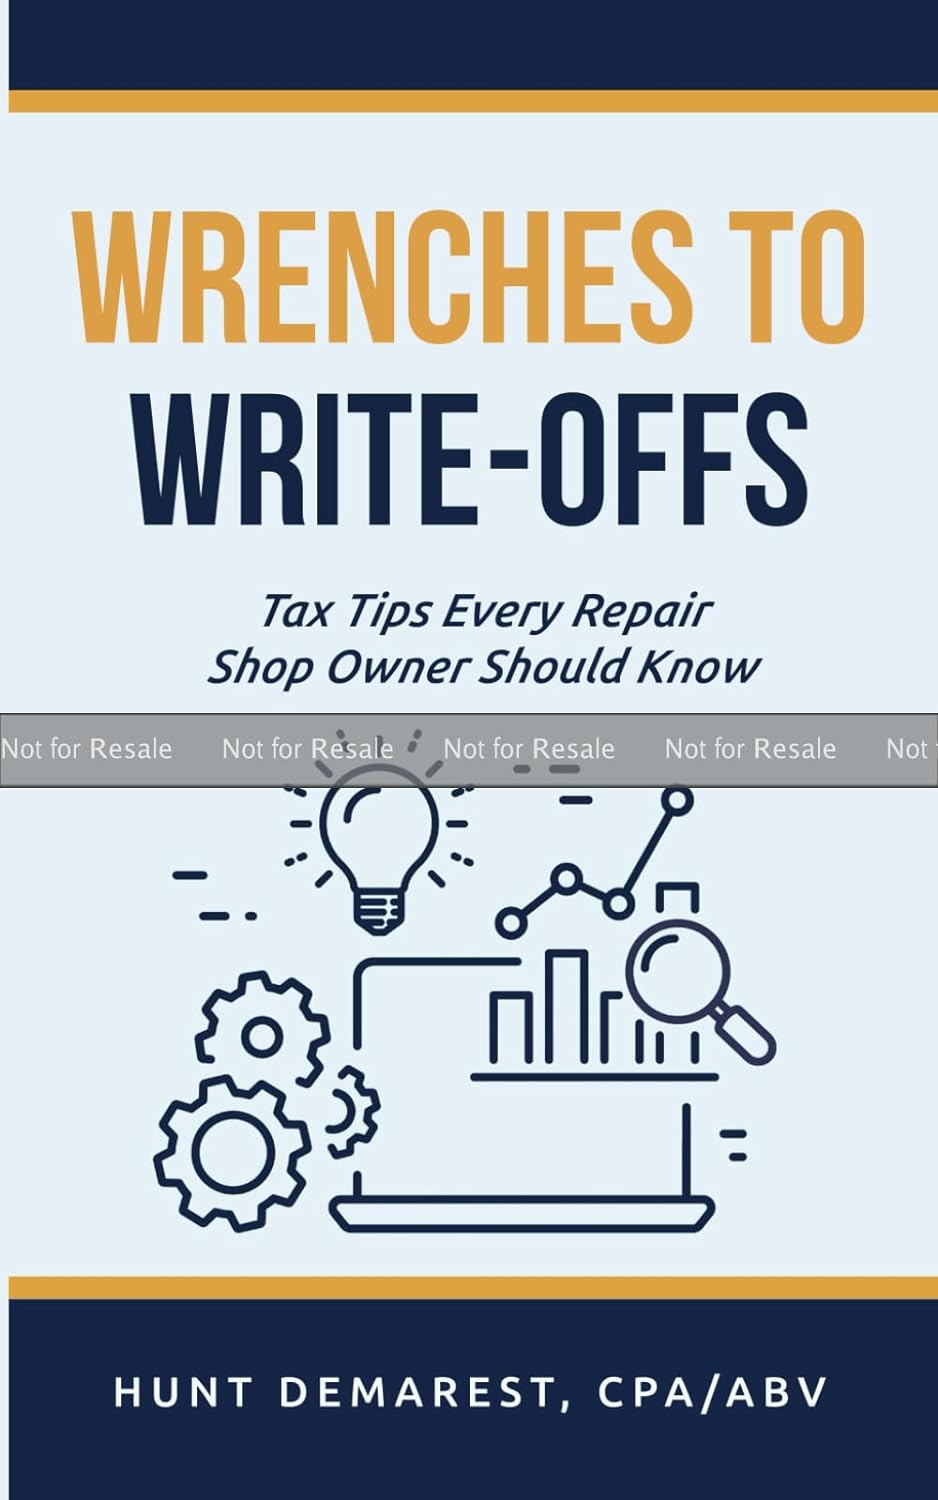 Hunt Demarest - Wrenches to Write-offs. Tax Tips Every Repair Shop Owner Should Know